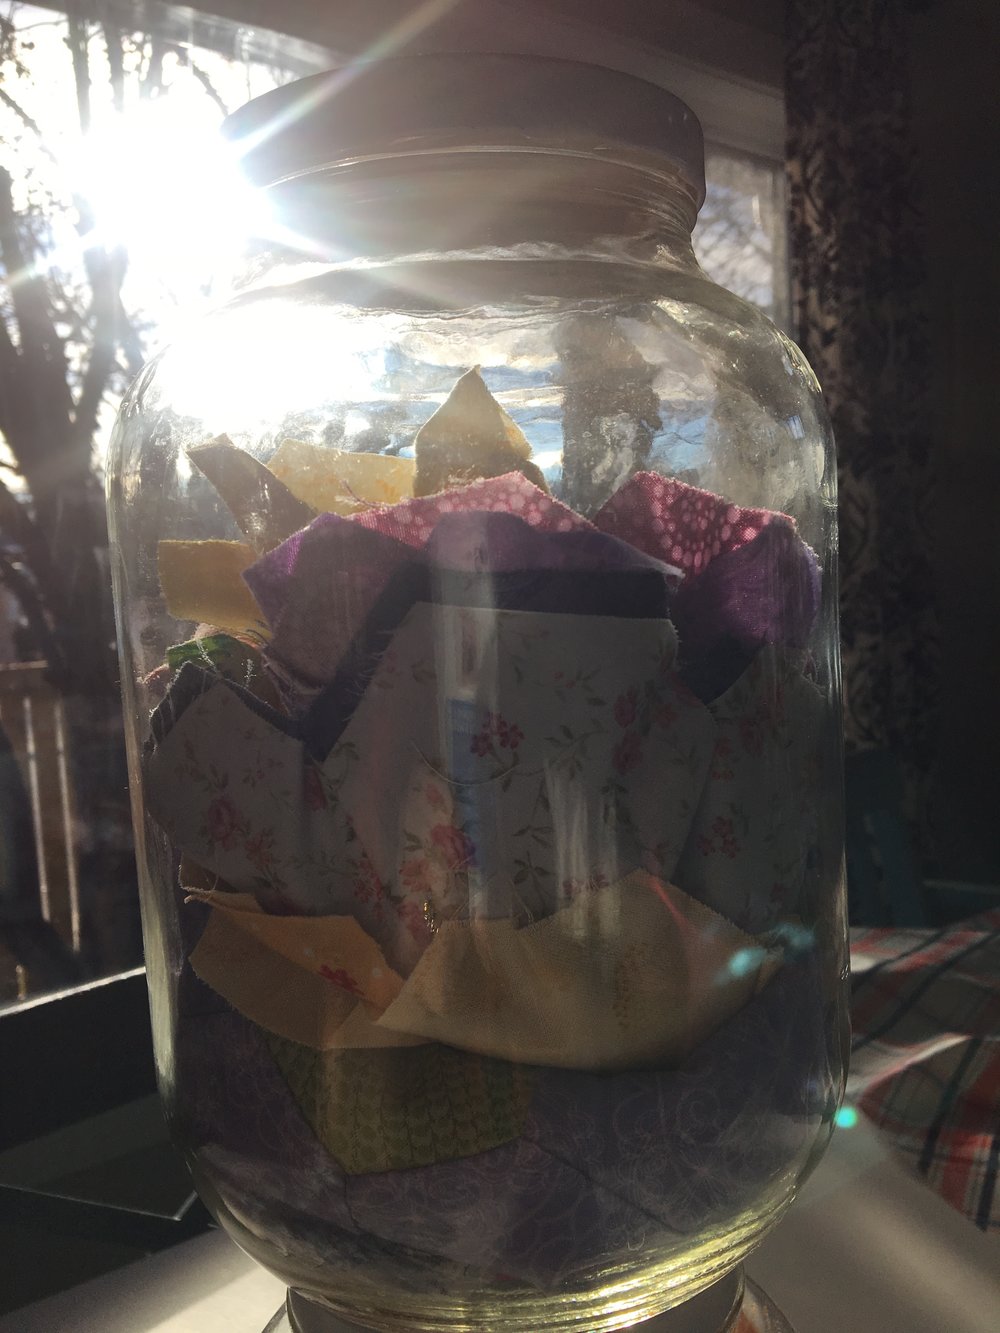 This was one of my grandma's jars. She died when I was 7. She was an extremely talented seamstress and quilter, basically a fabric magician. She is one of the reasons I started to sew when I was 10. I feel connected to her when I create with fabric.